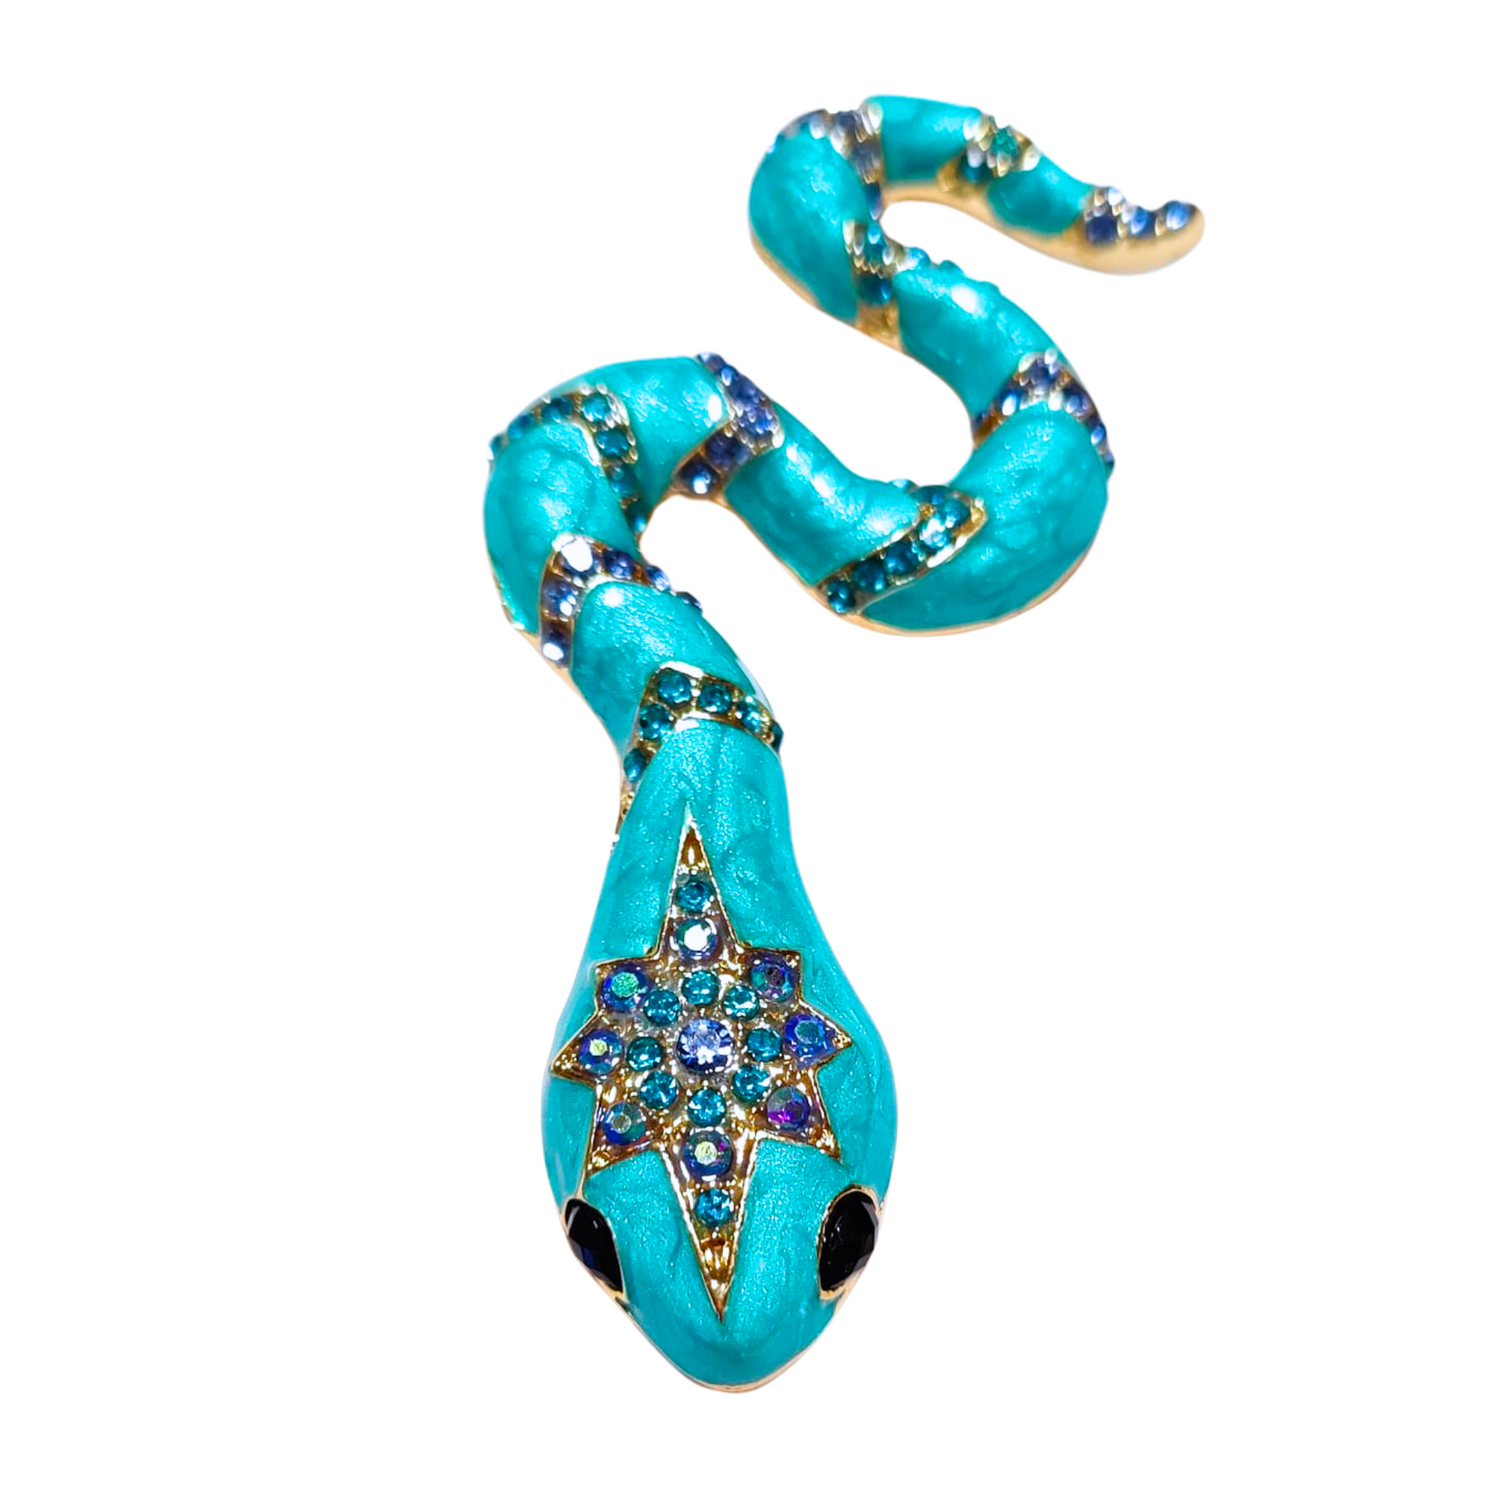 Teal Snake With Jewels Lapel Pin